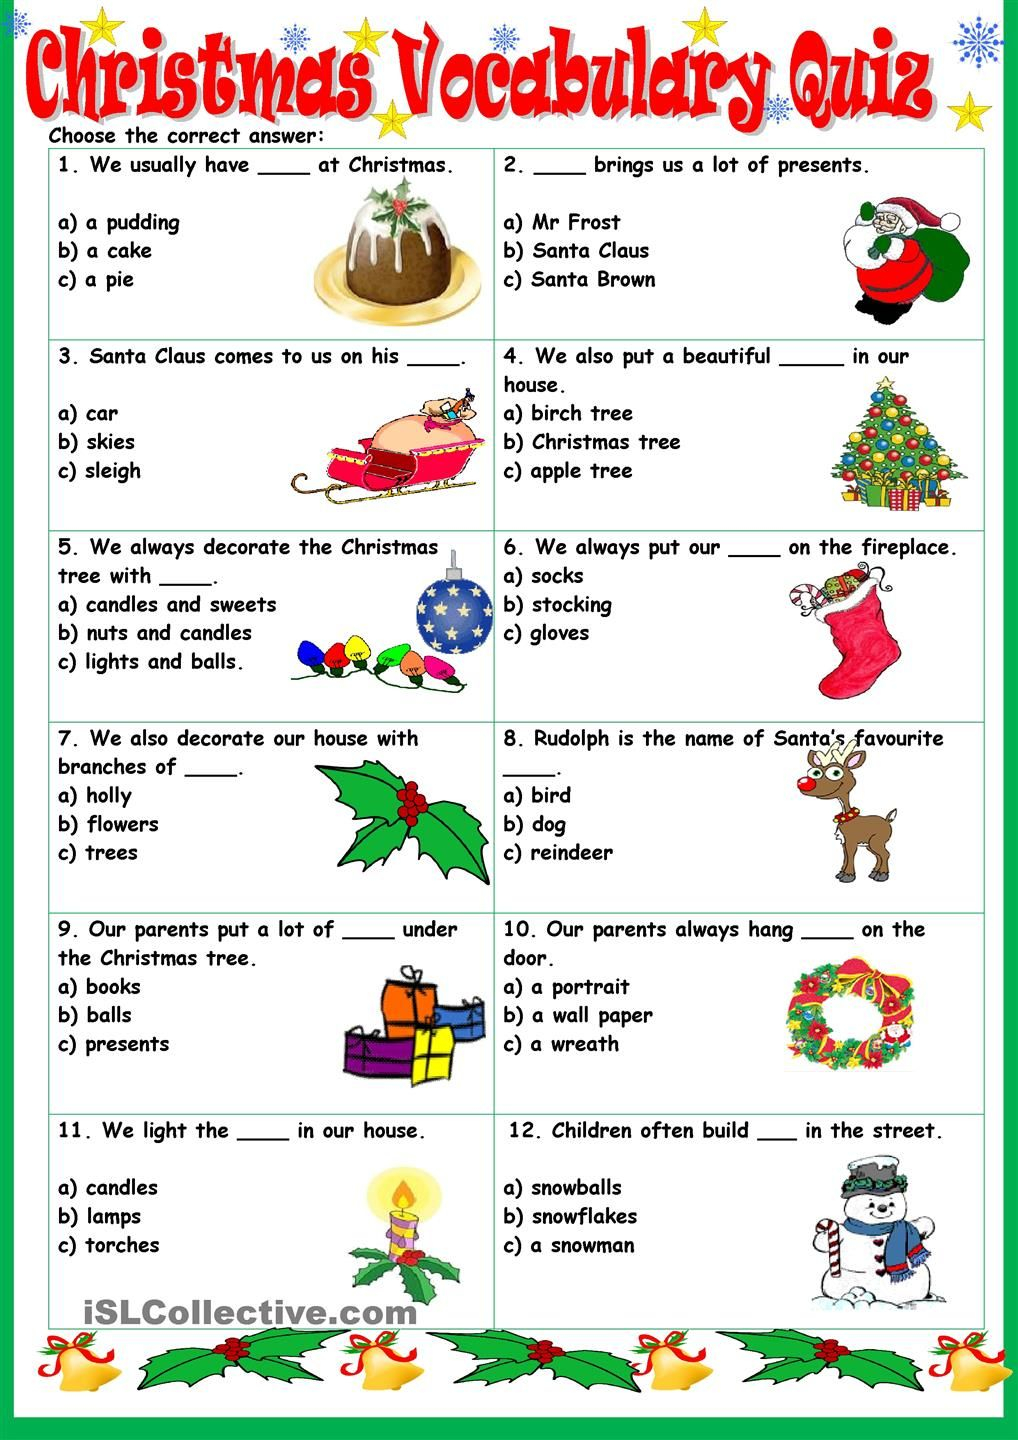 calameo-daily-routines-vocabulary-esl-matching-exercise-worksheets